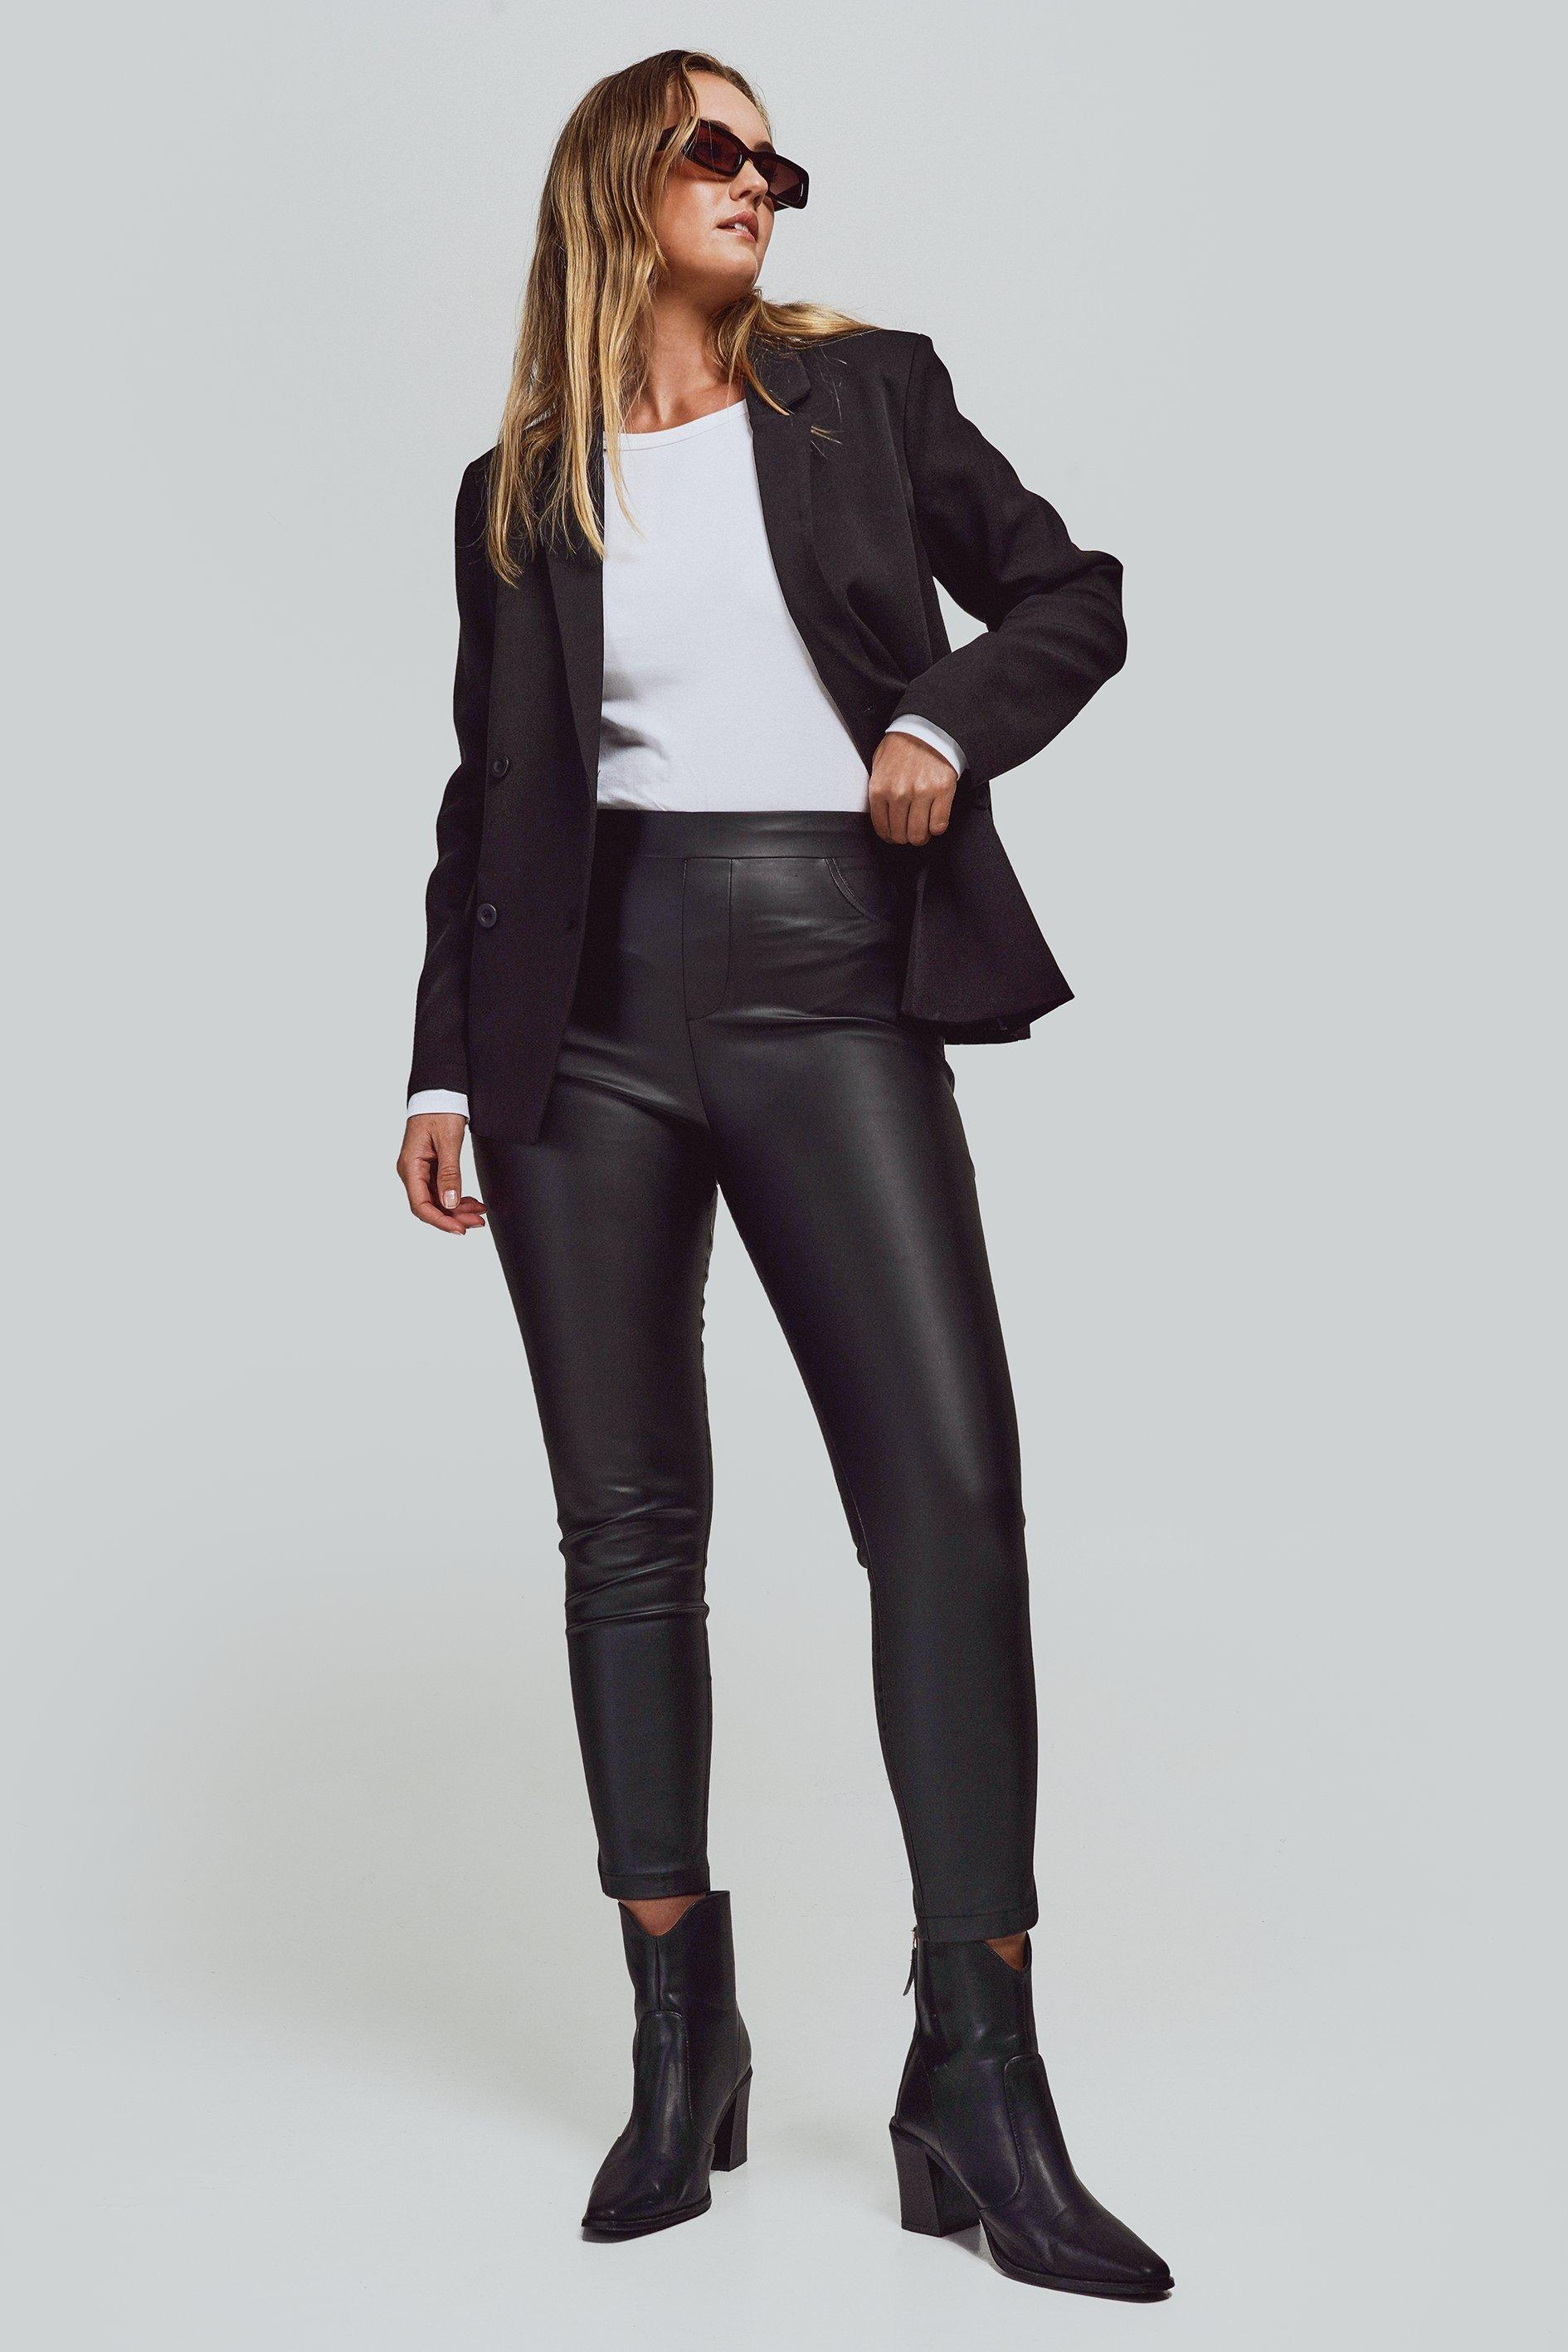 Pleather Leggings — Fashion Consolidated